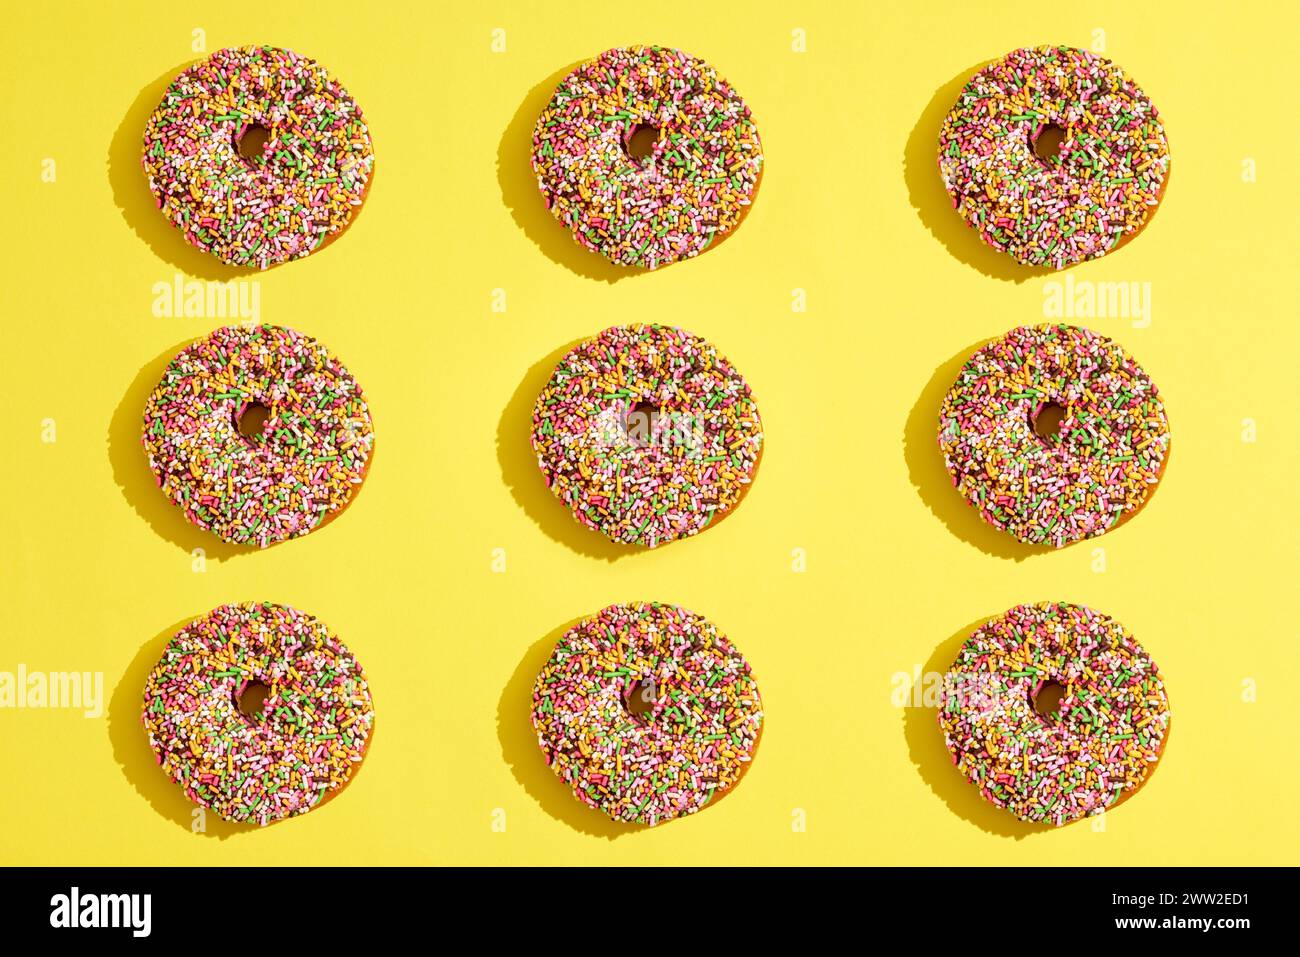 Donuts arranged on a yellow background Stock Photo